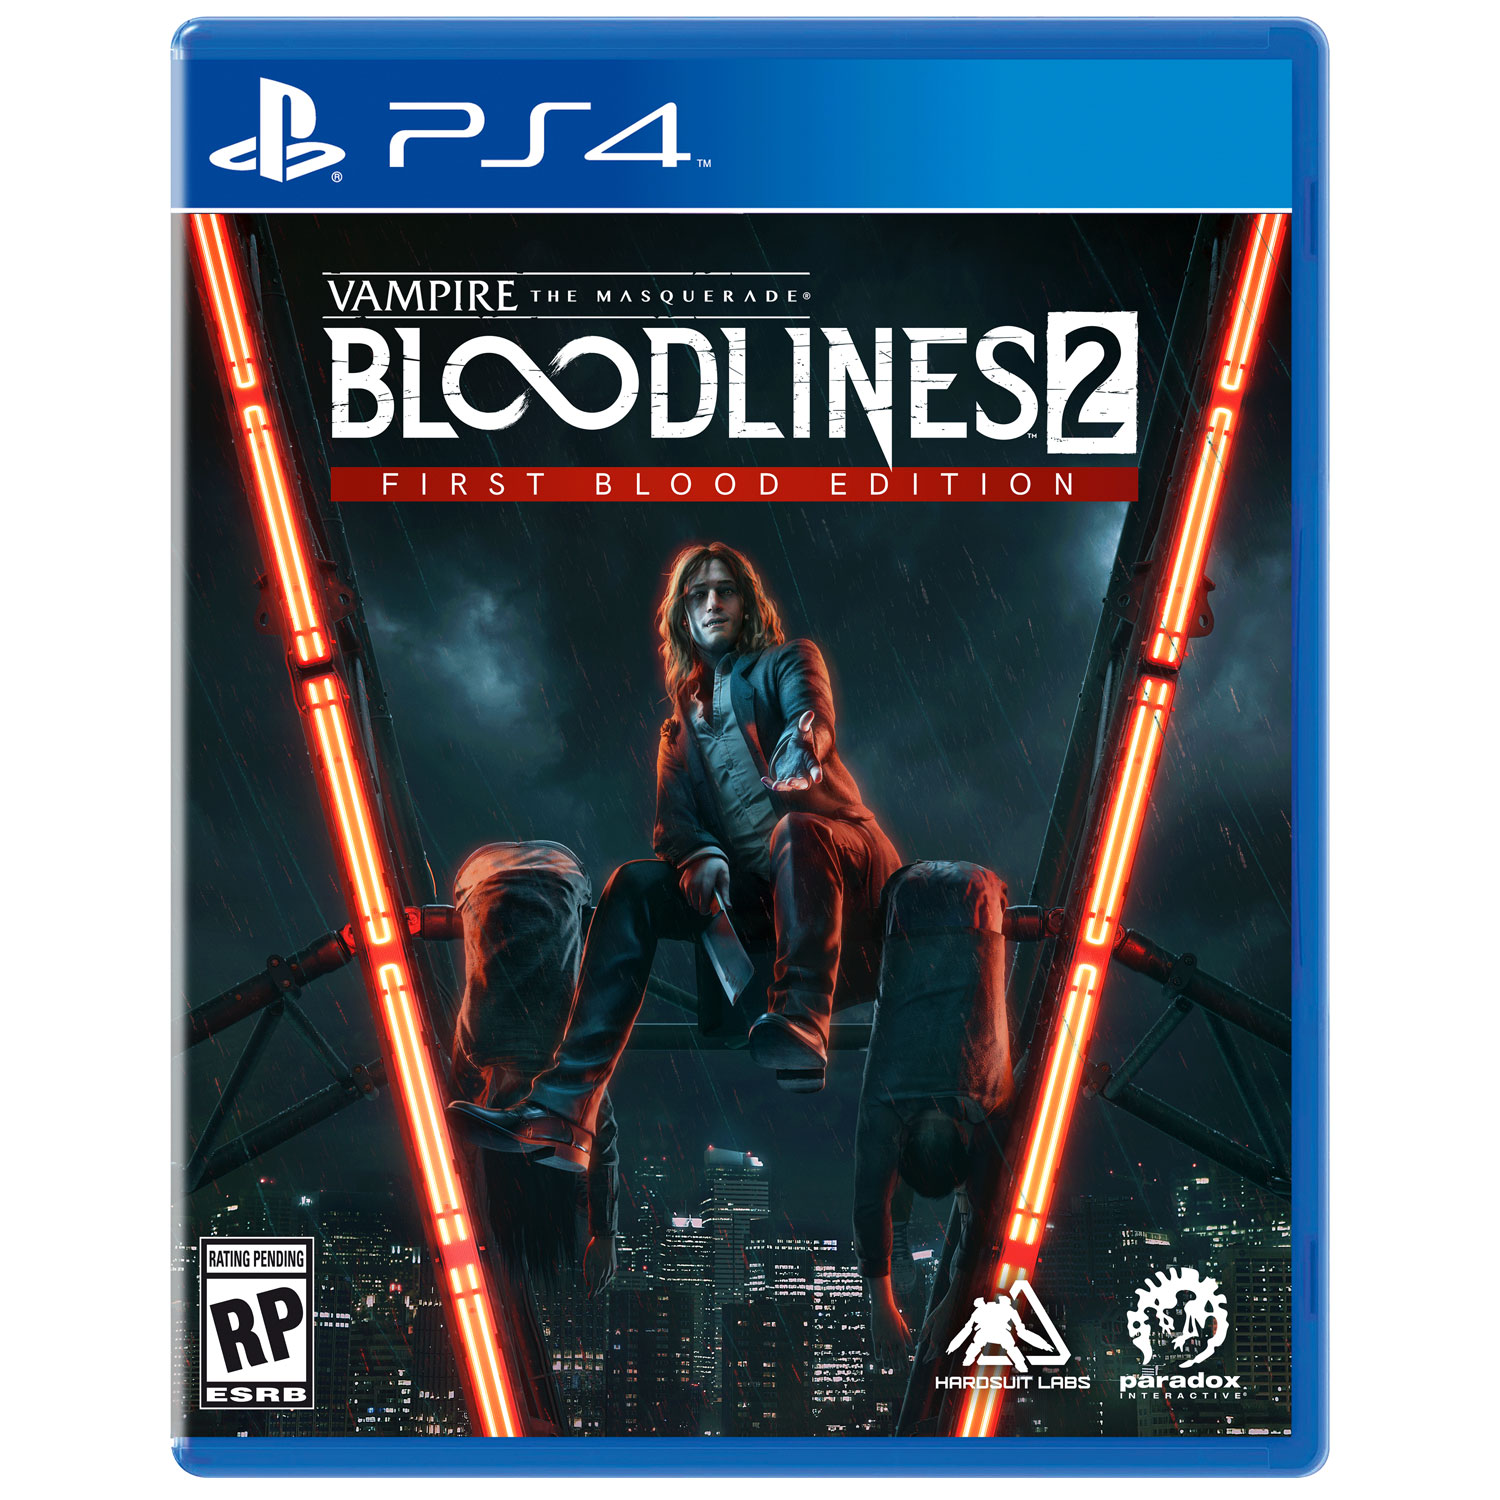 Vampire: The Masquerade - Bloodlines 2 First Blood Edition (PS4)